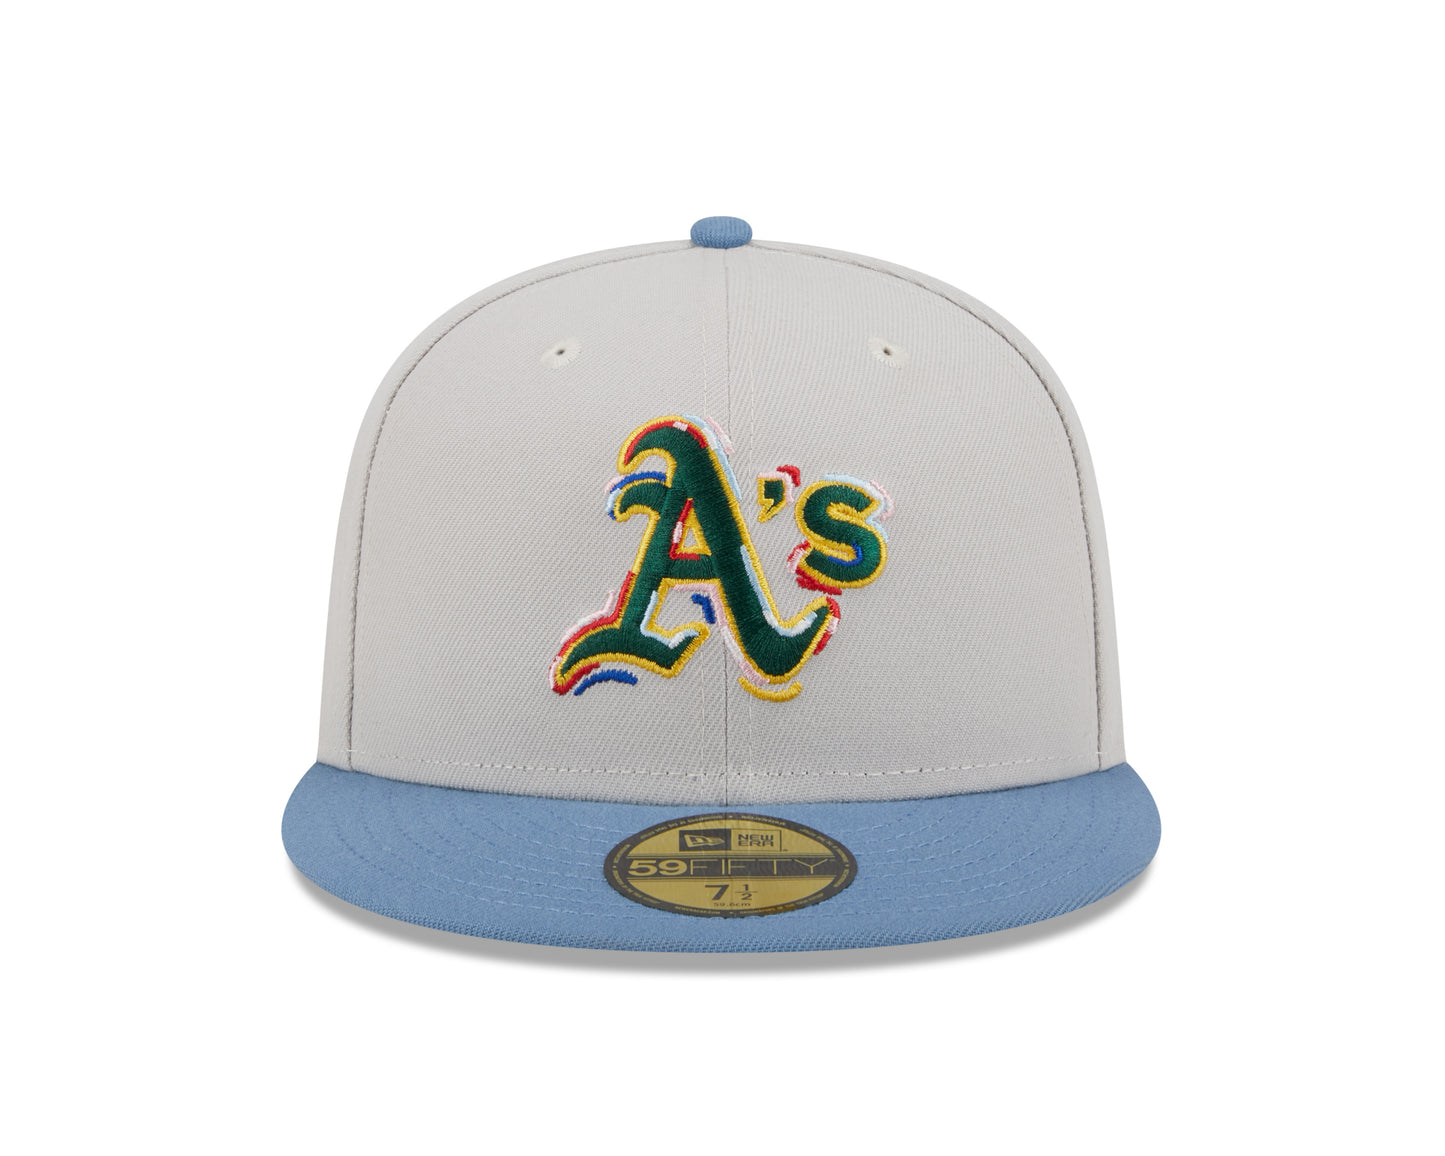 New Era - COLOR BRUSH - 59fifty Fitted Cap - Oakland Athletics - Stone - Headz Up 